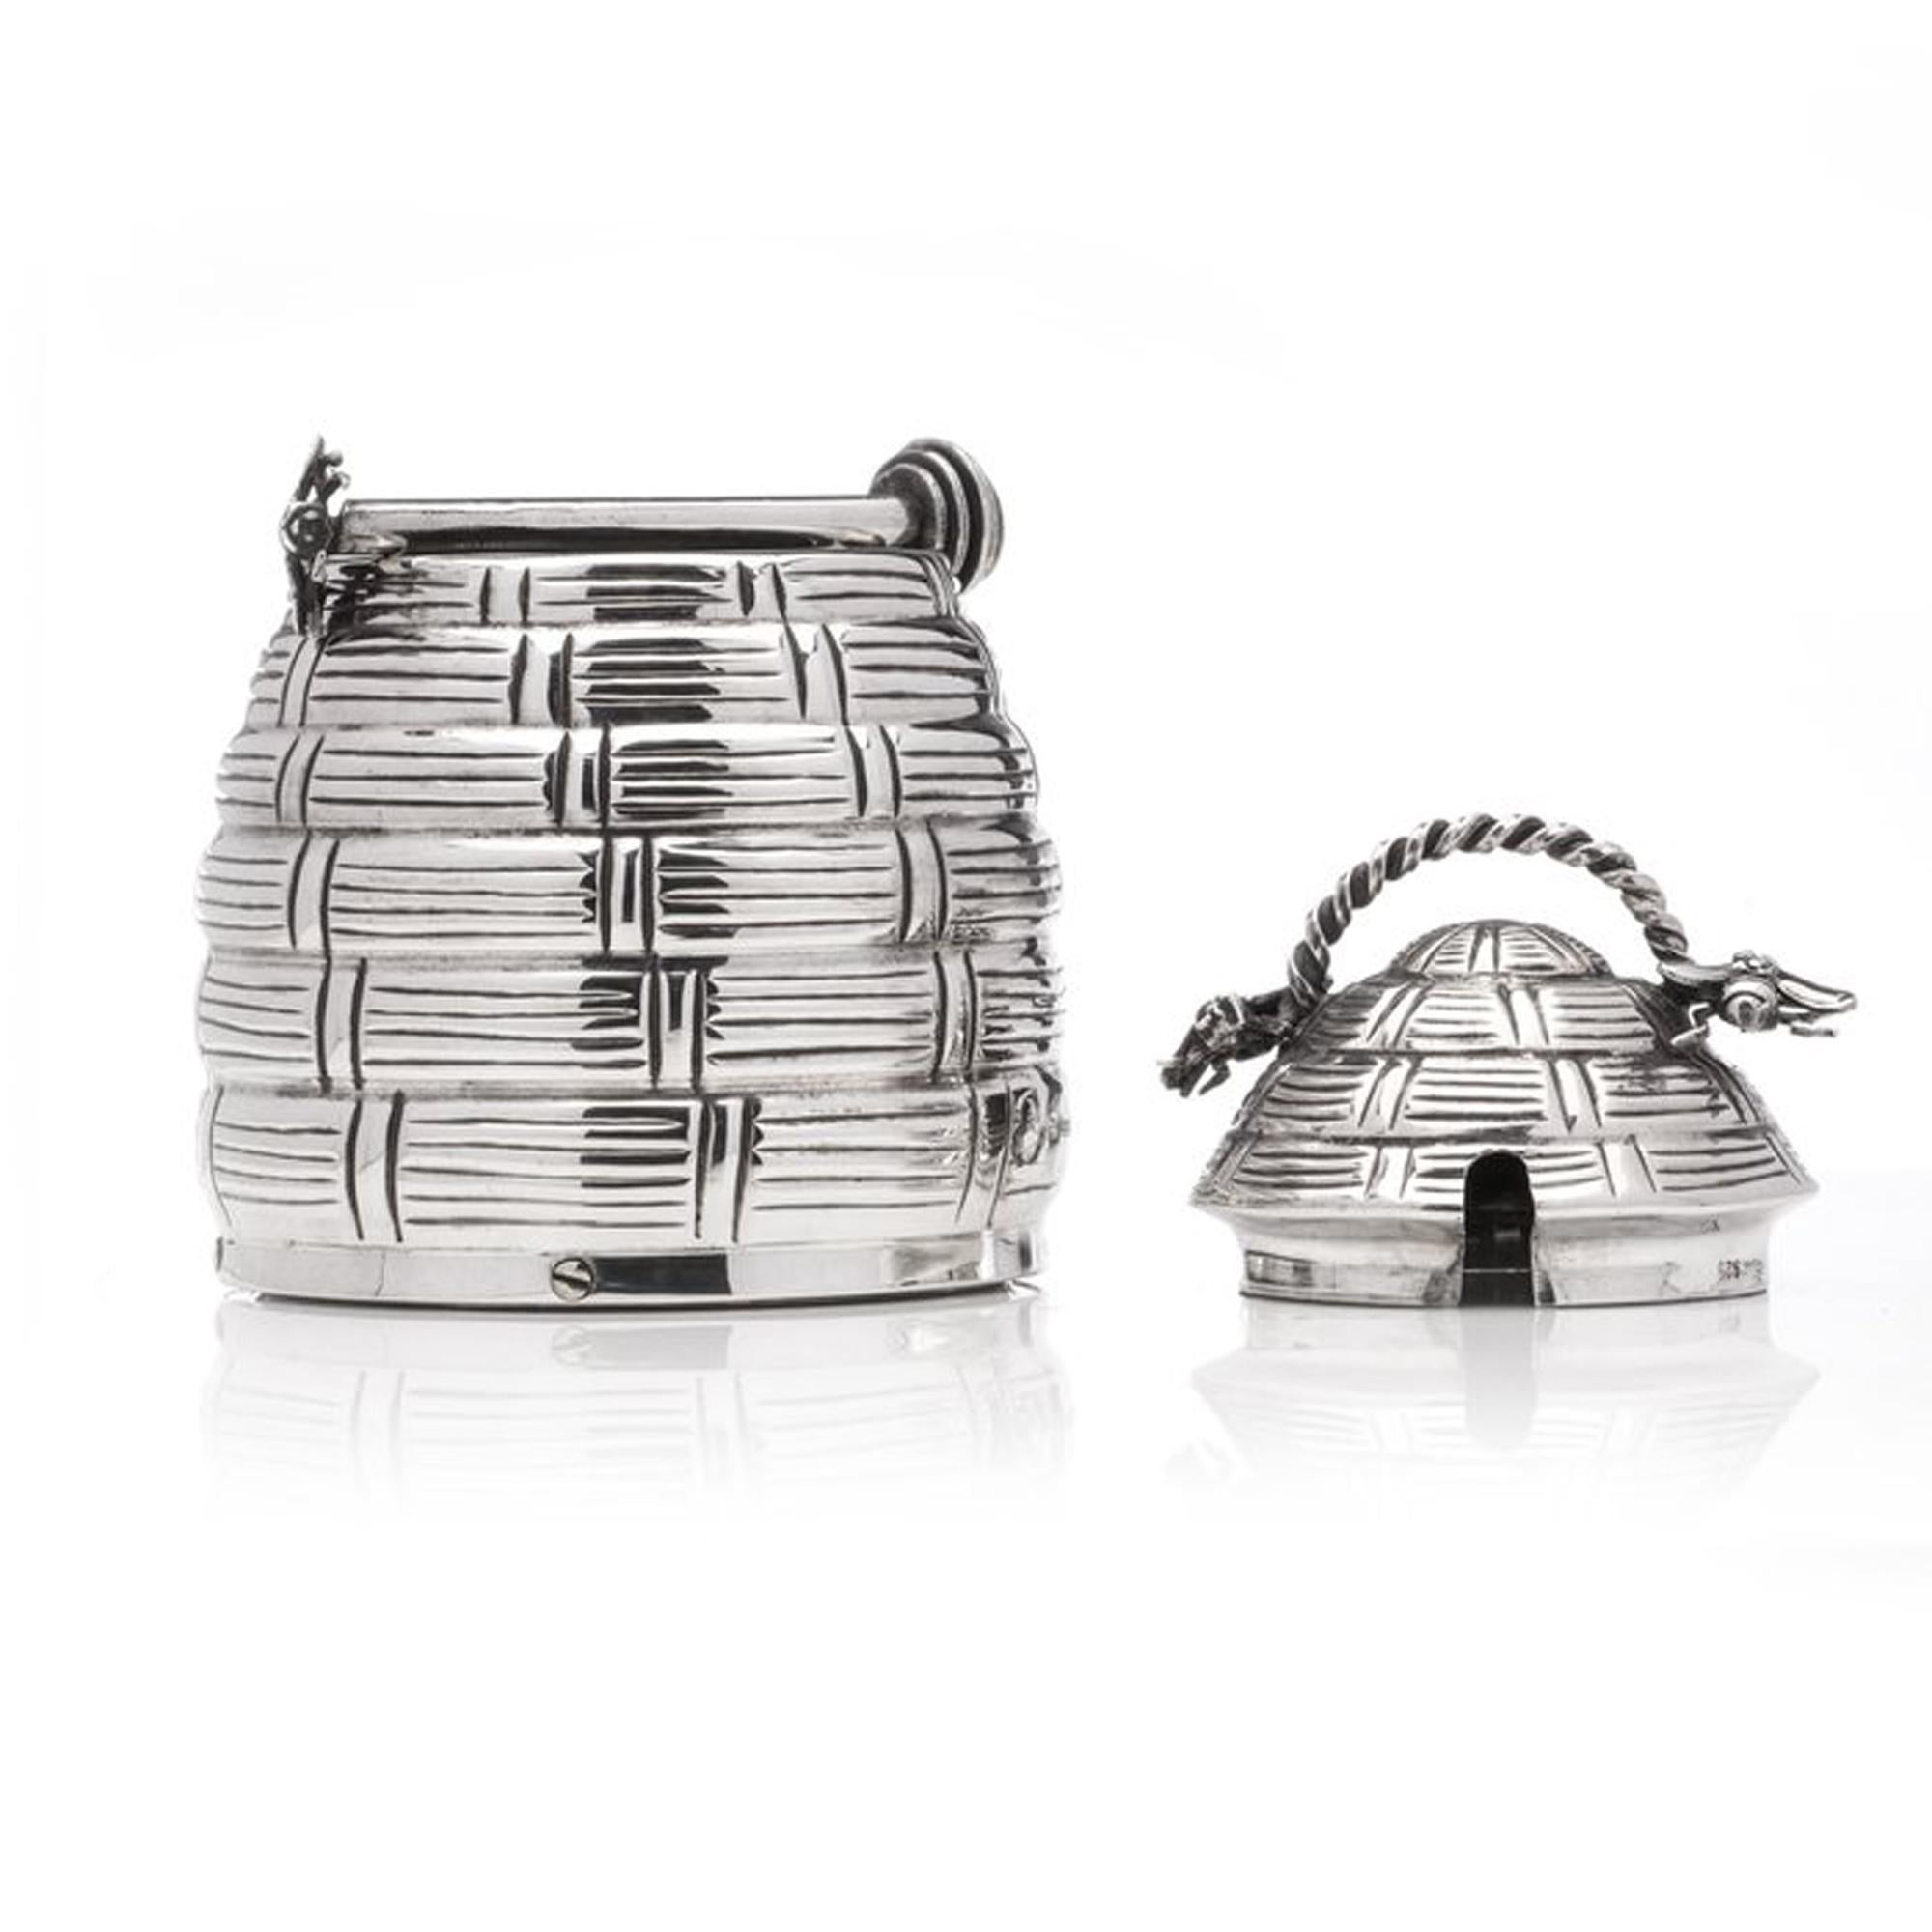 Contemporary Sterling 925 silver beehive honey pot with a spoon For Sale